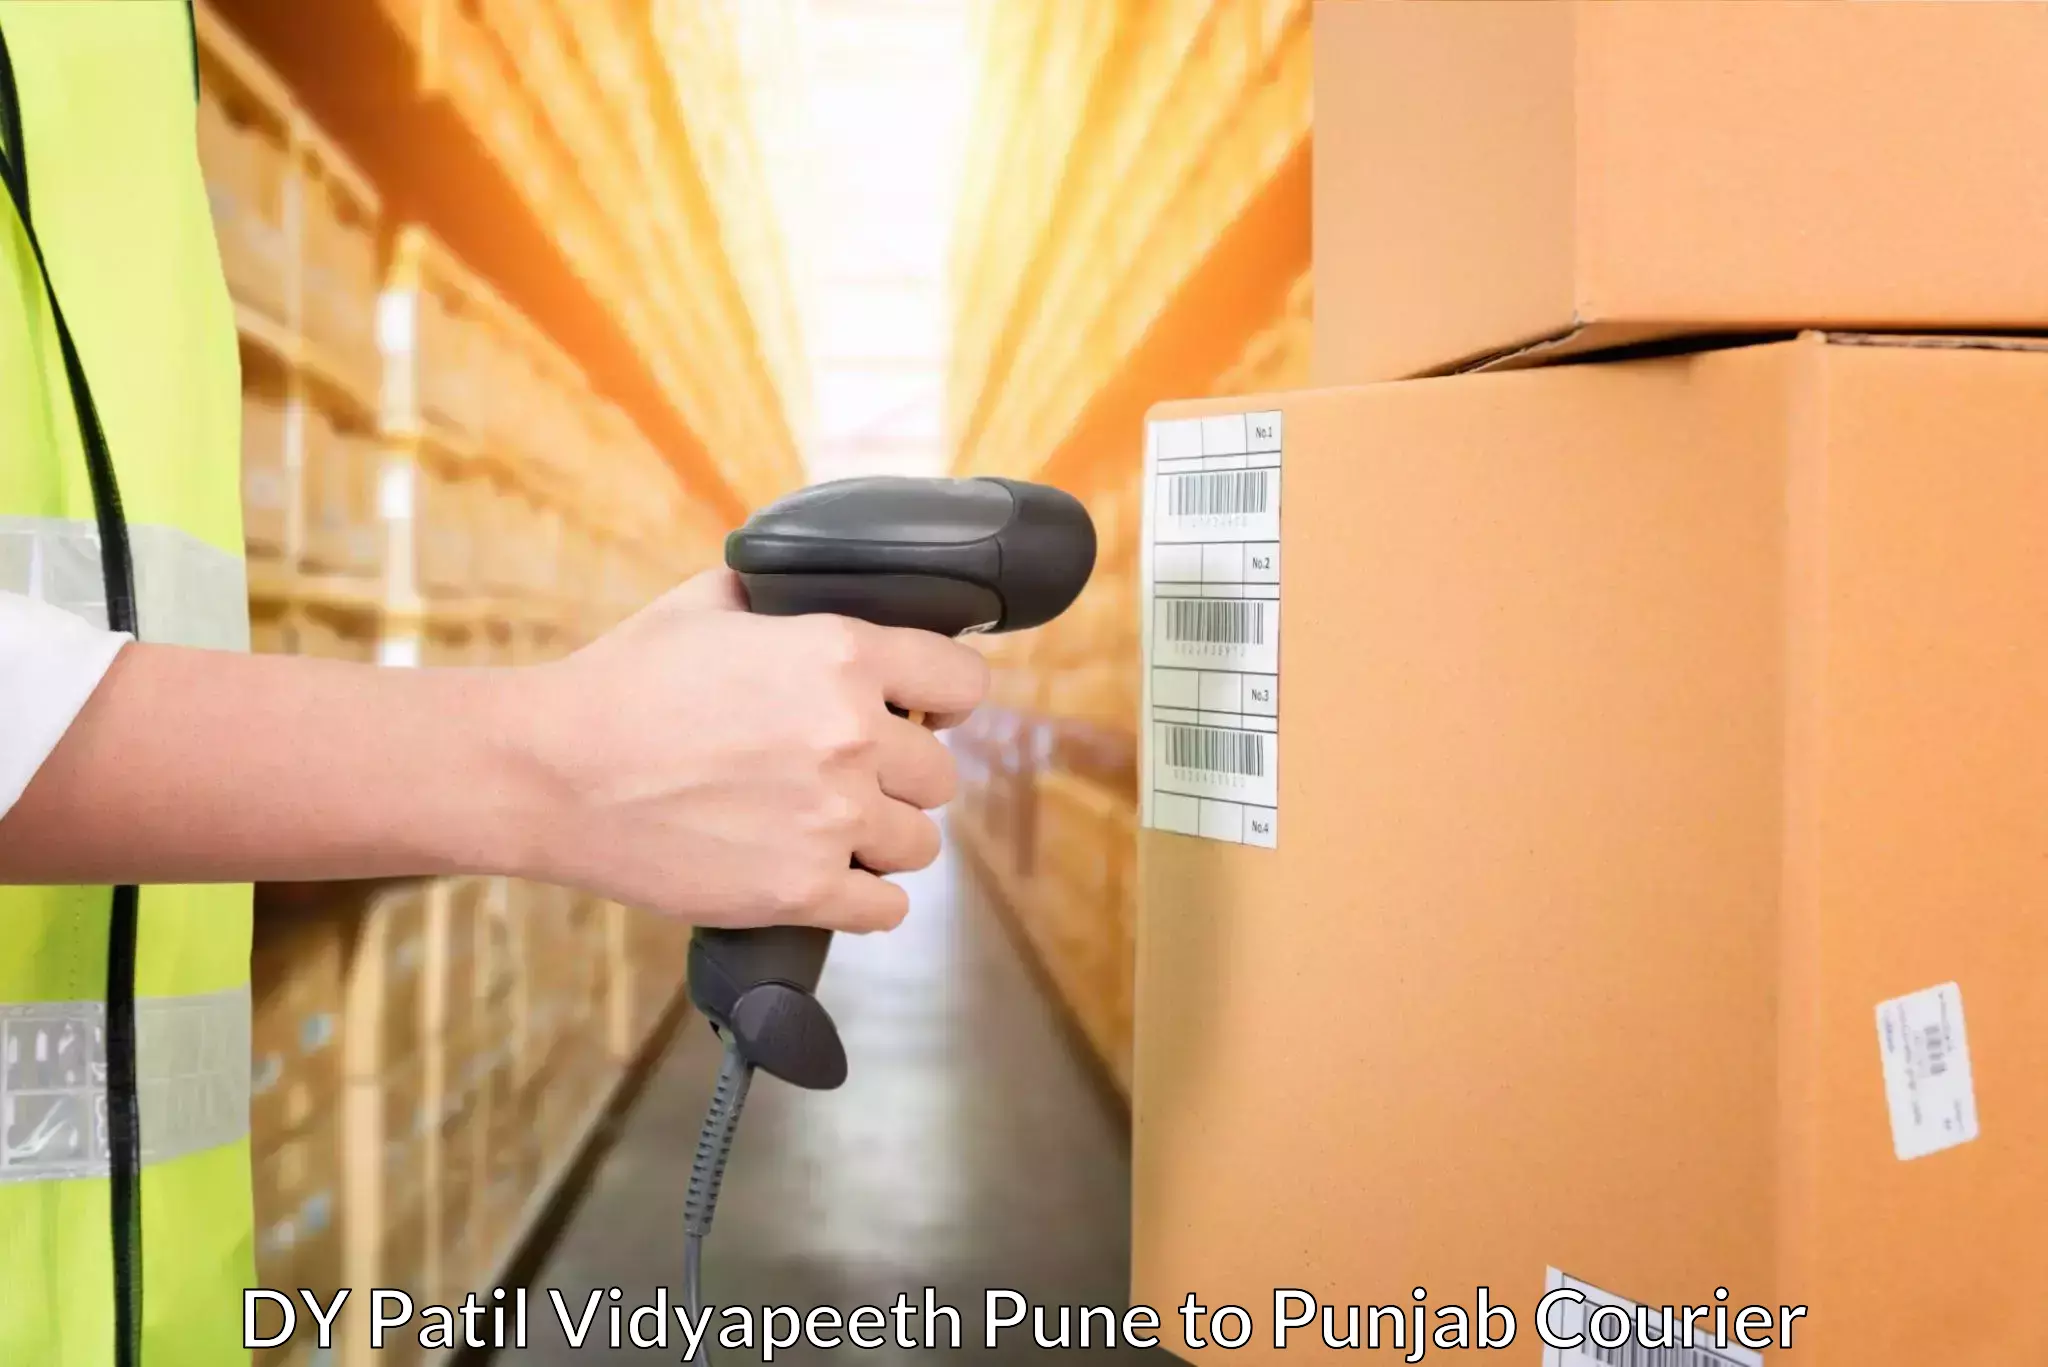 Holiday shipping services in DY Patil Vidyapeeth Pune to Rajpura